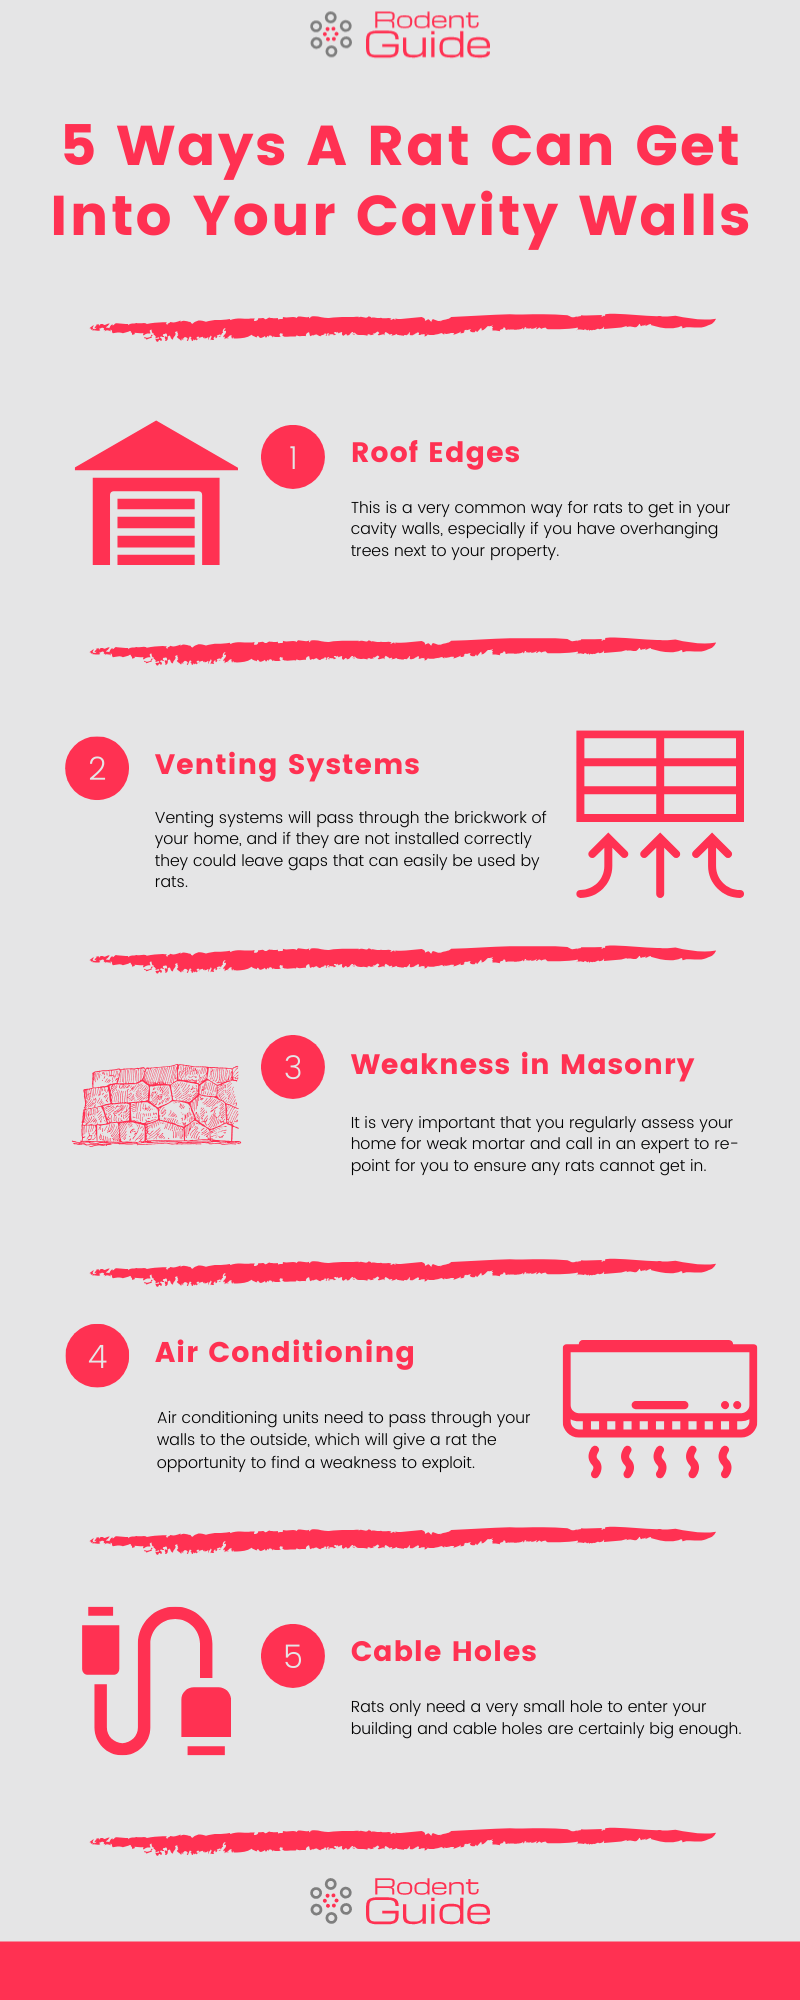 5 Ways A Rat Can Get Into Your Cavity Walls Infographic